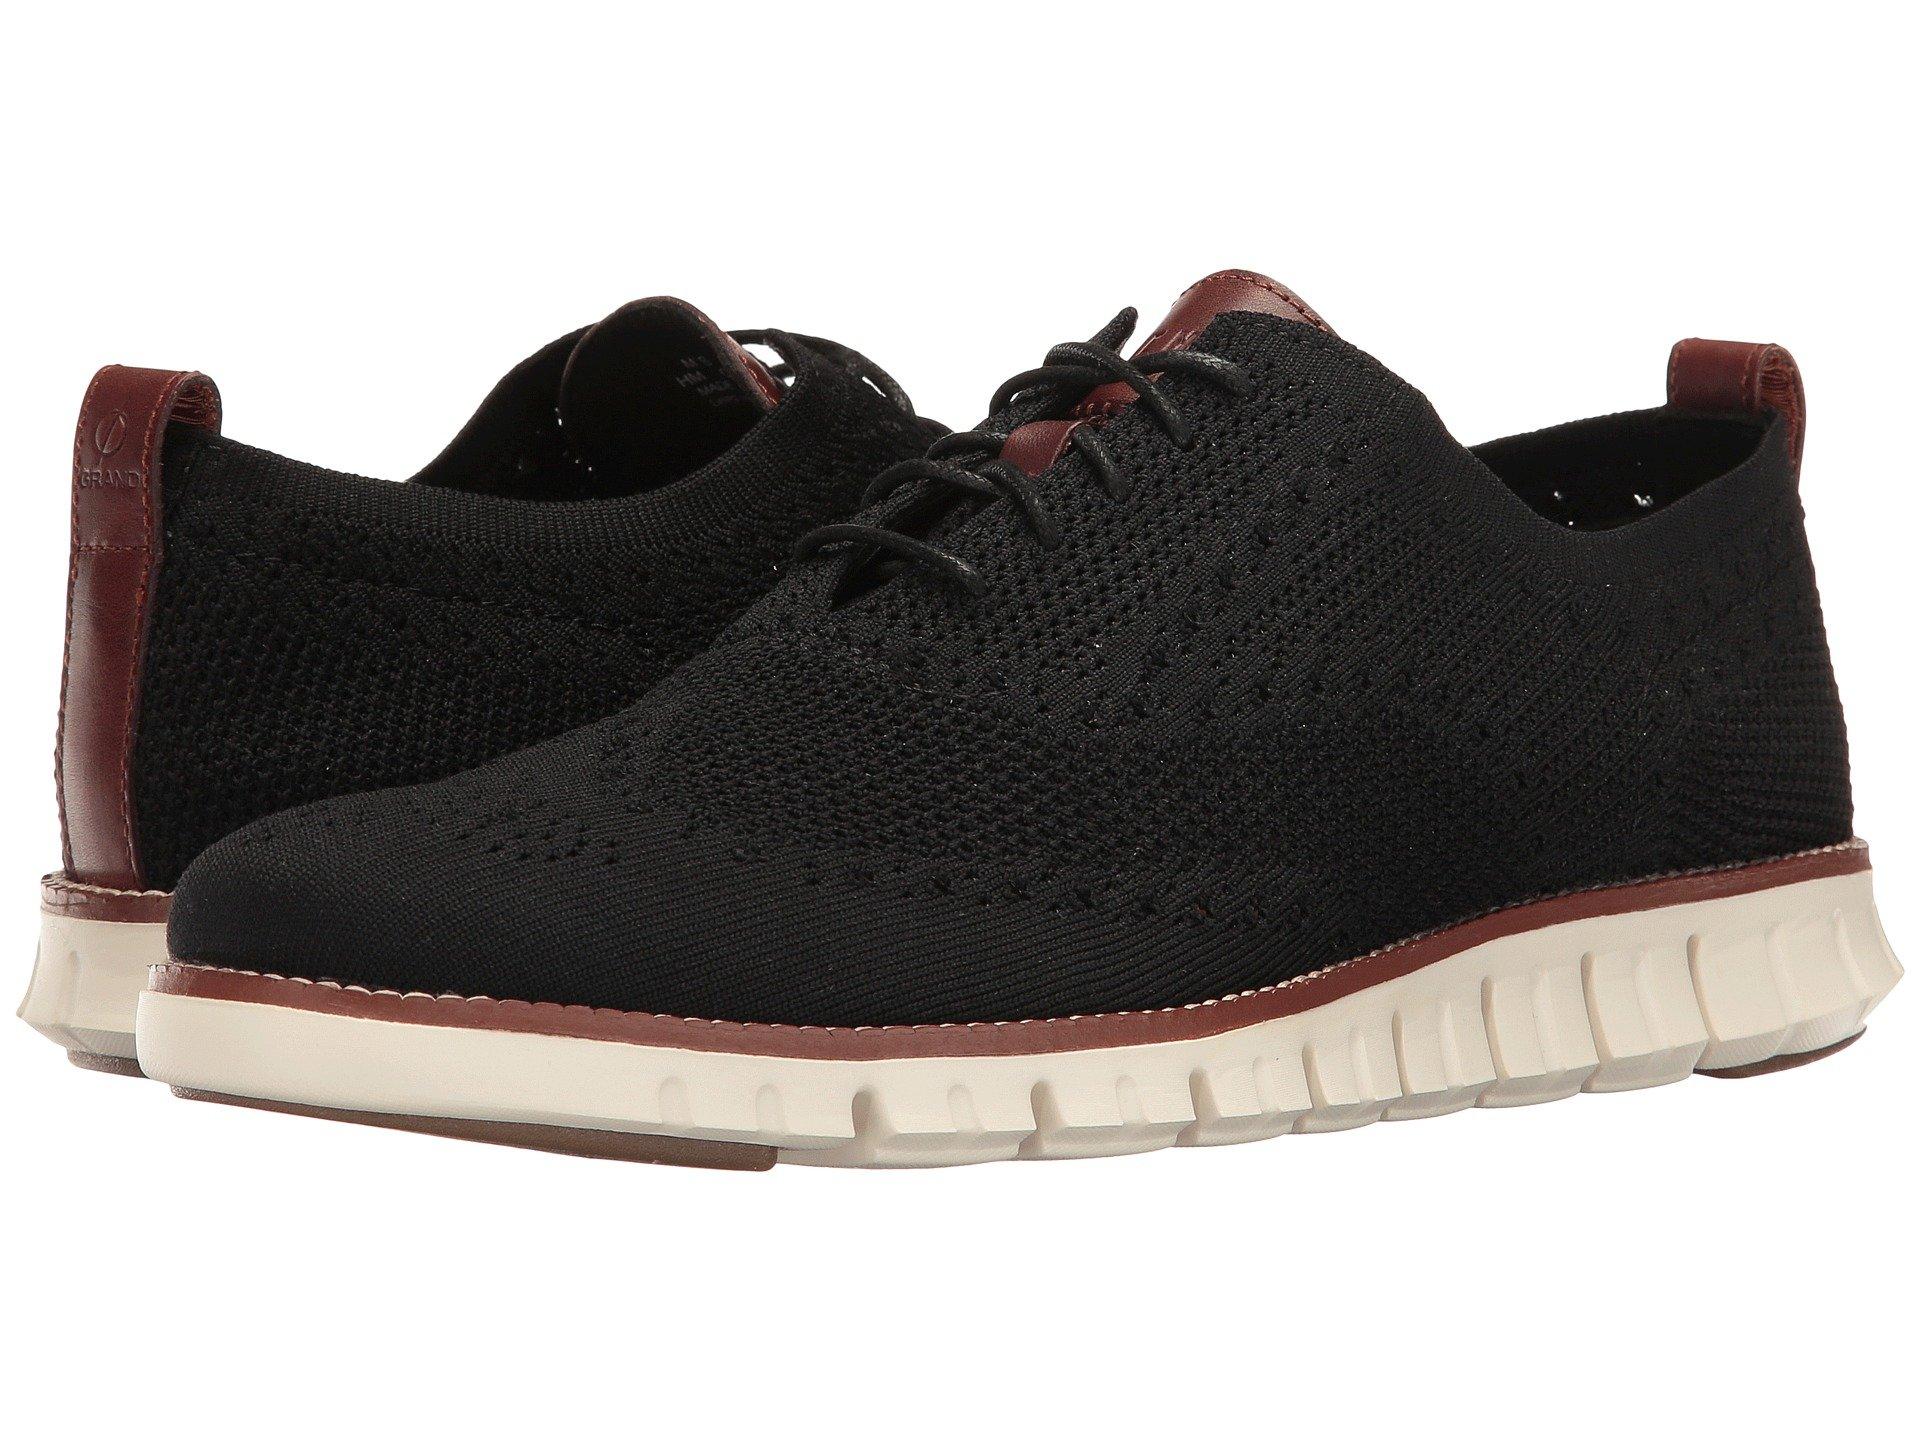 Cole Haan Synthetic Zerogrand Stitchlite Wingtip Oxford in Black/Ivory ...